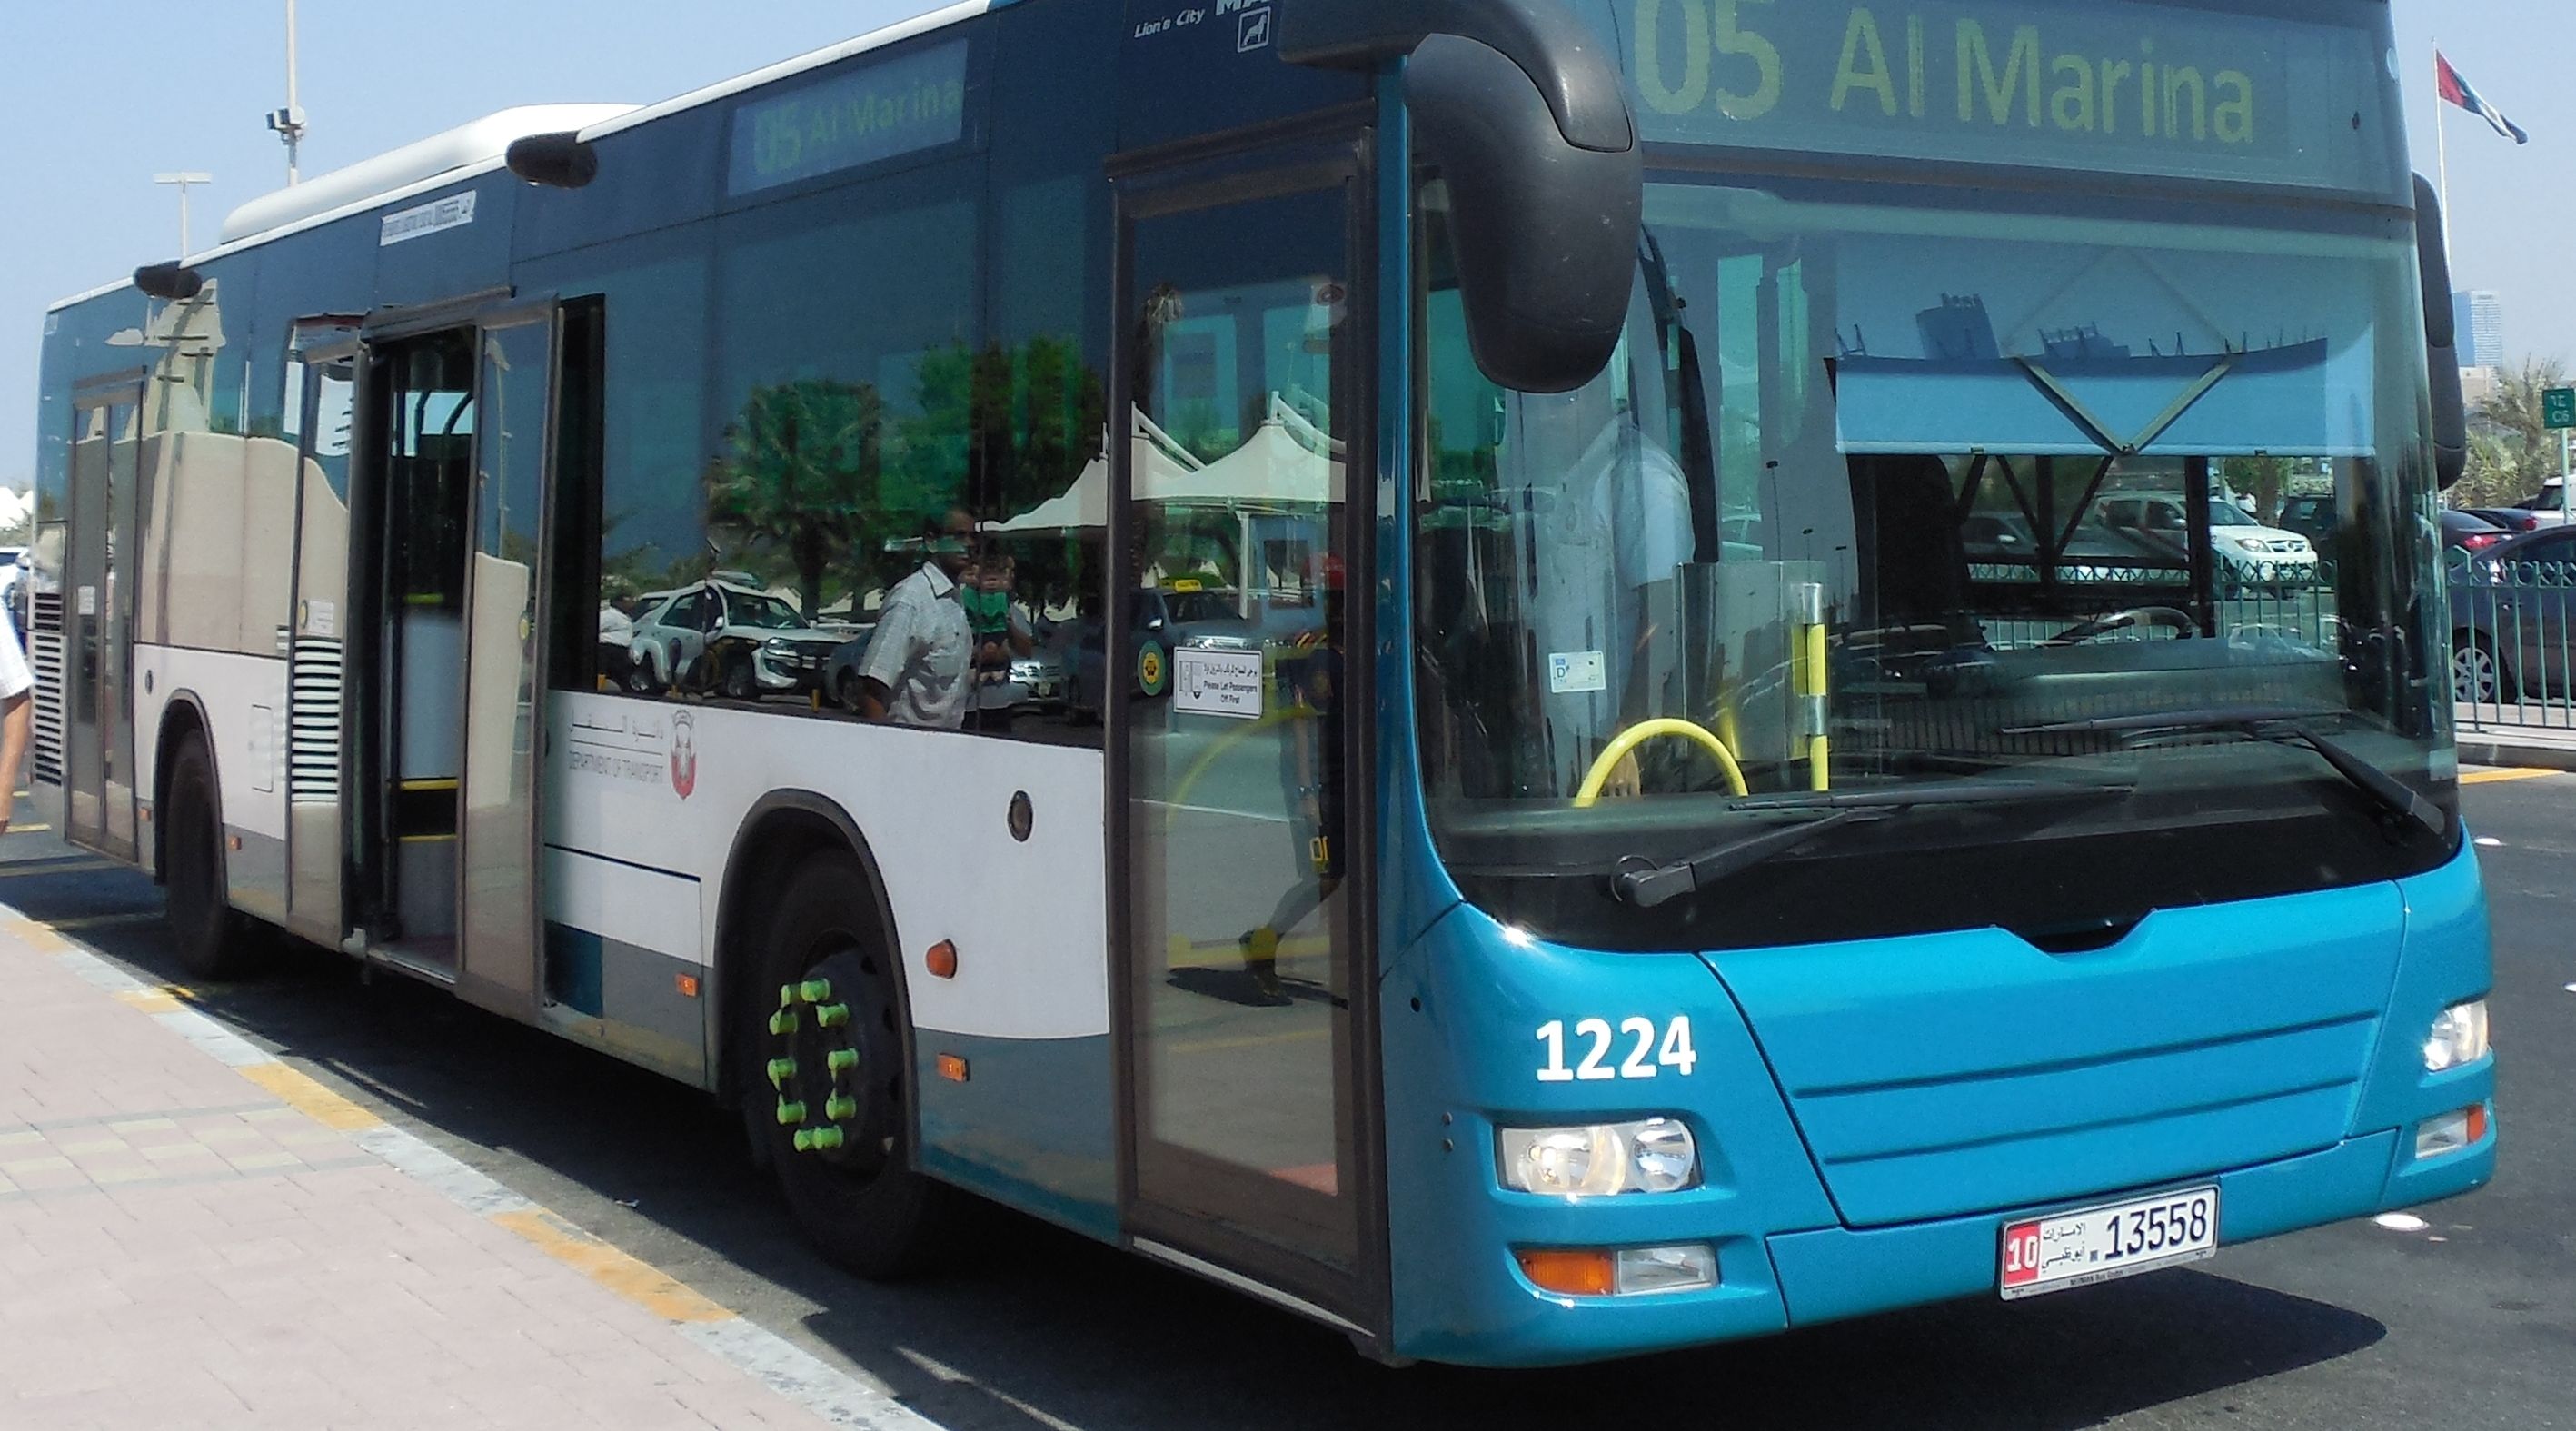 Dmt Implements Intensive Disinfection Of All Public Bus Services In Abu Dhabi